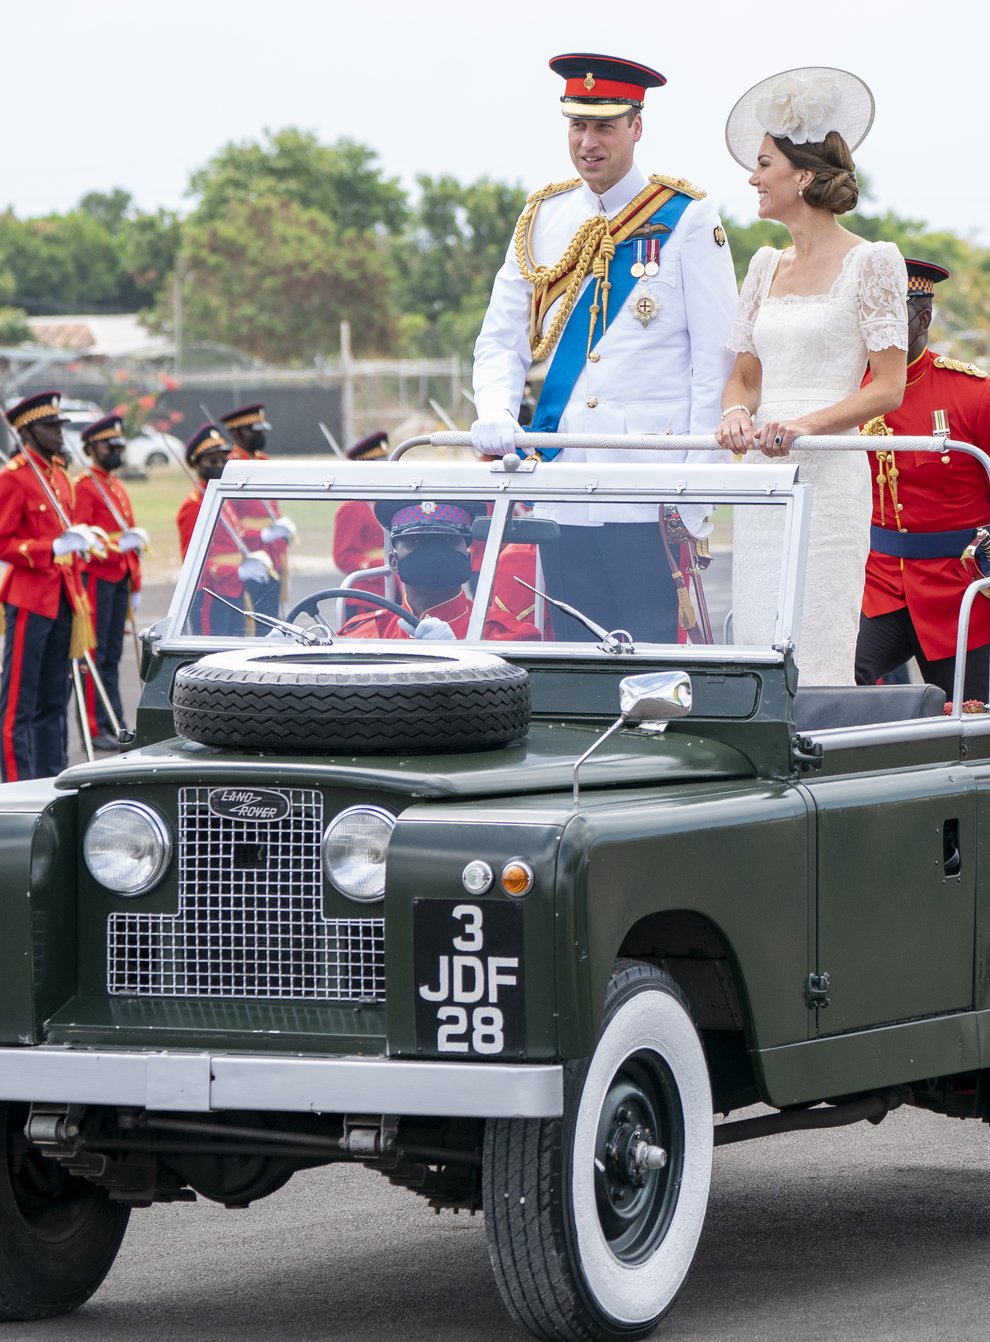 The Duke and Duchess of Cambridge attend the inaugural Commissioning Parade for service personnel from across the Caribbean who have recently completed the Caribbean Military Academy’s Officer Training Programme, in Kingston, Jamaica, on day six of their tour of the Caribbean on behalf of the Queen to mark her Platinum Jubilee. Picture date: Thursday March 24, 2022.